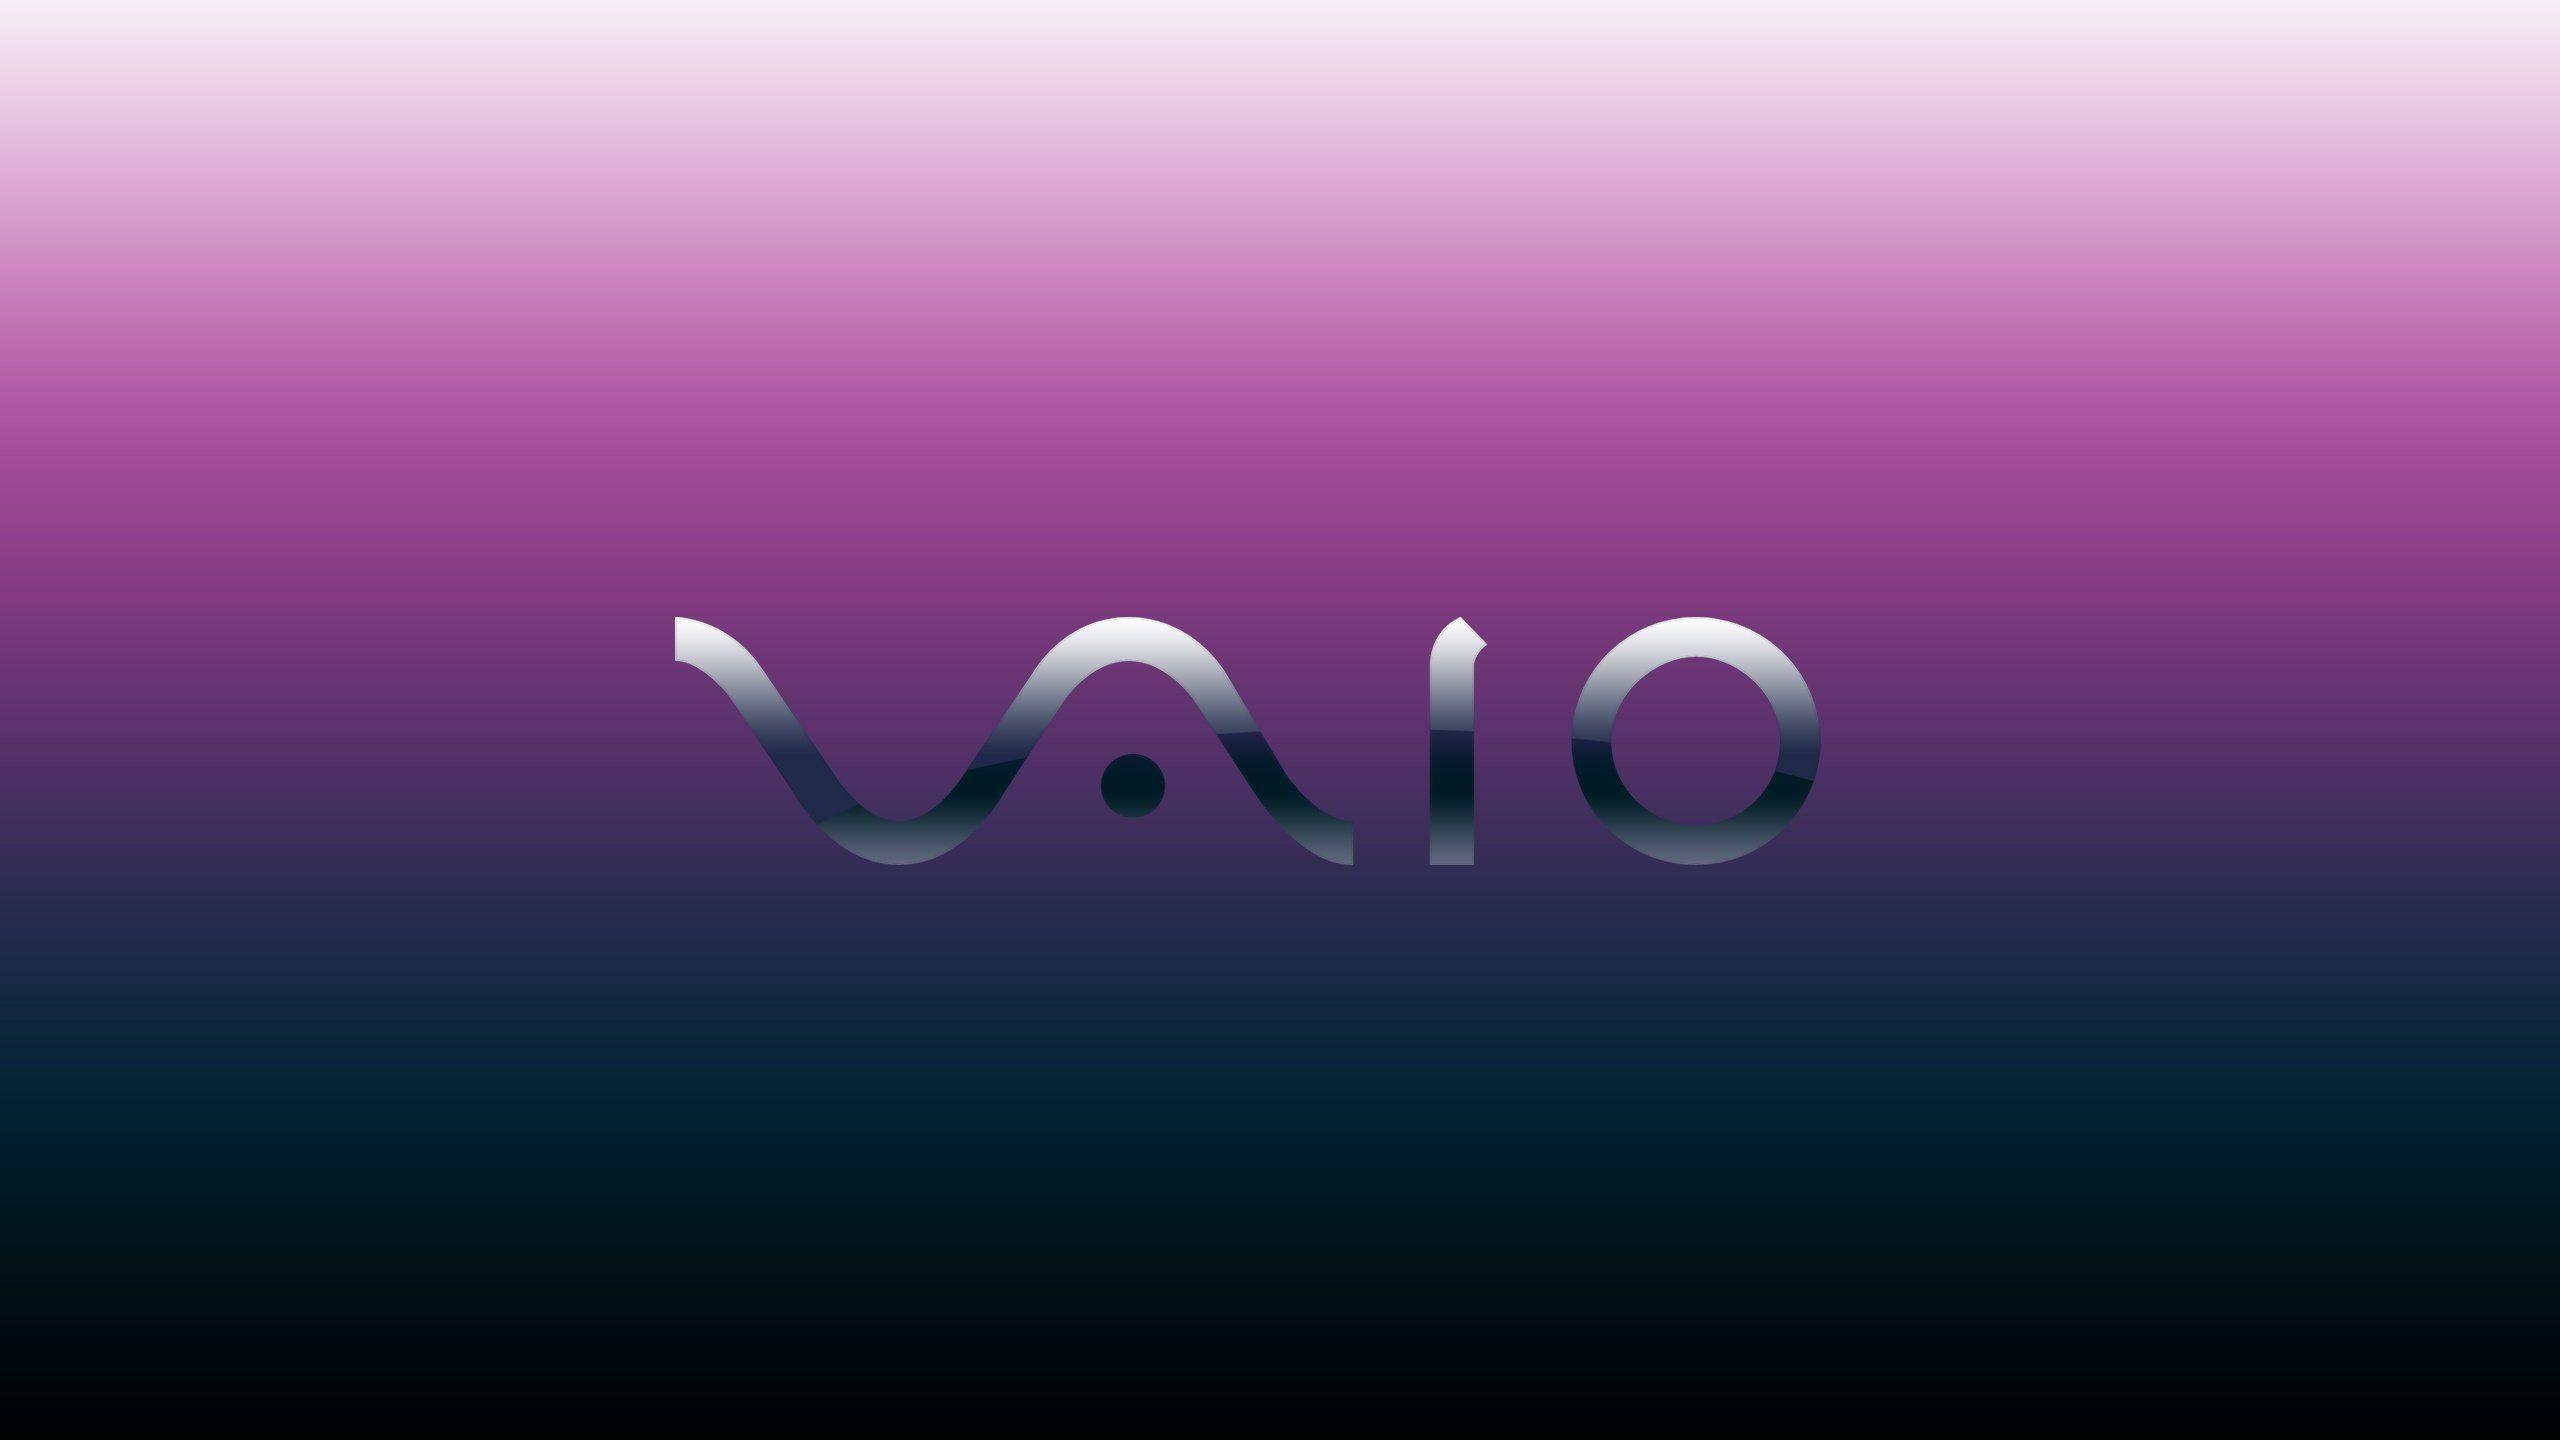 Sony Vaio Wallpaper WallDevil free HD desktop and mobile